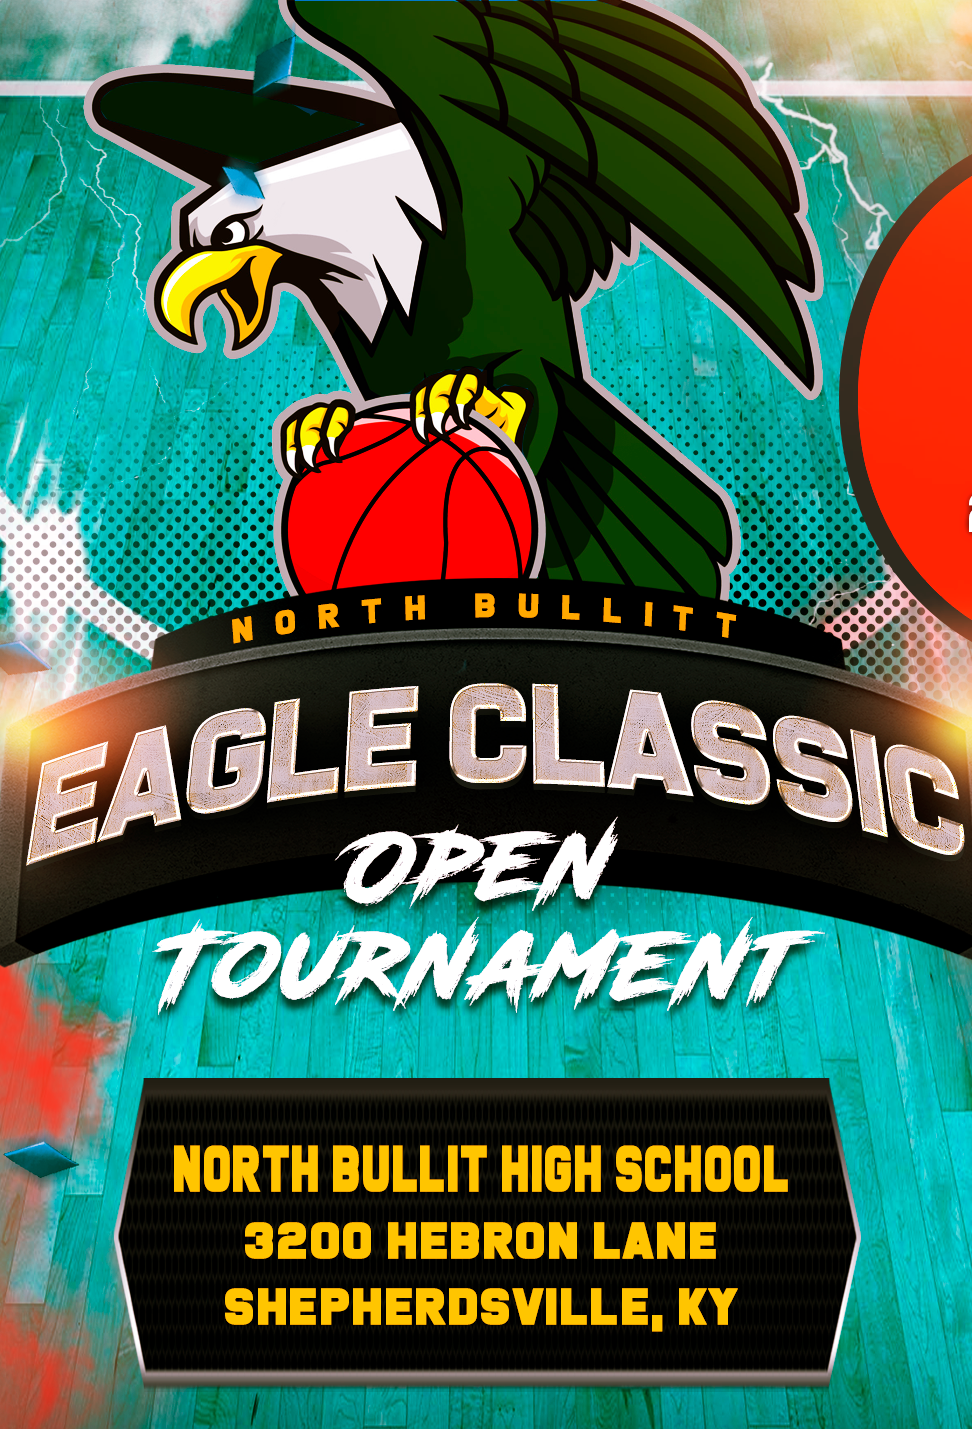 <span style="color: #ff0000;"><strong>North Bullitt Eagle Classic<br />Feb. 18-19, 2023<br /><a href="http://www.midwestbballtournaments.com/ViewEvent.aspx?EID=1021">Click Here for Details </a></strong></span>